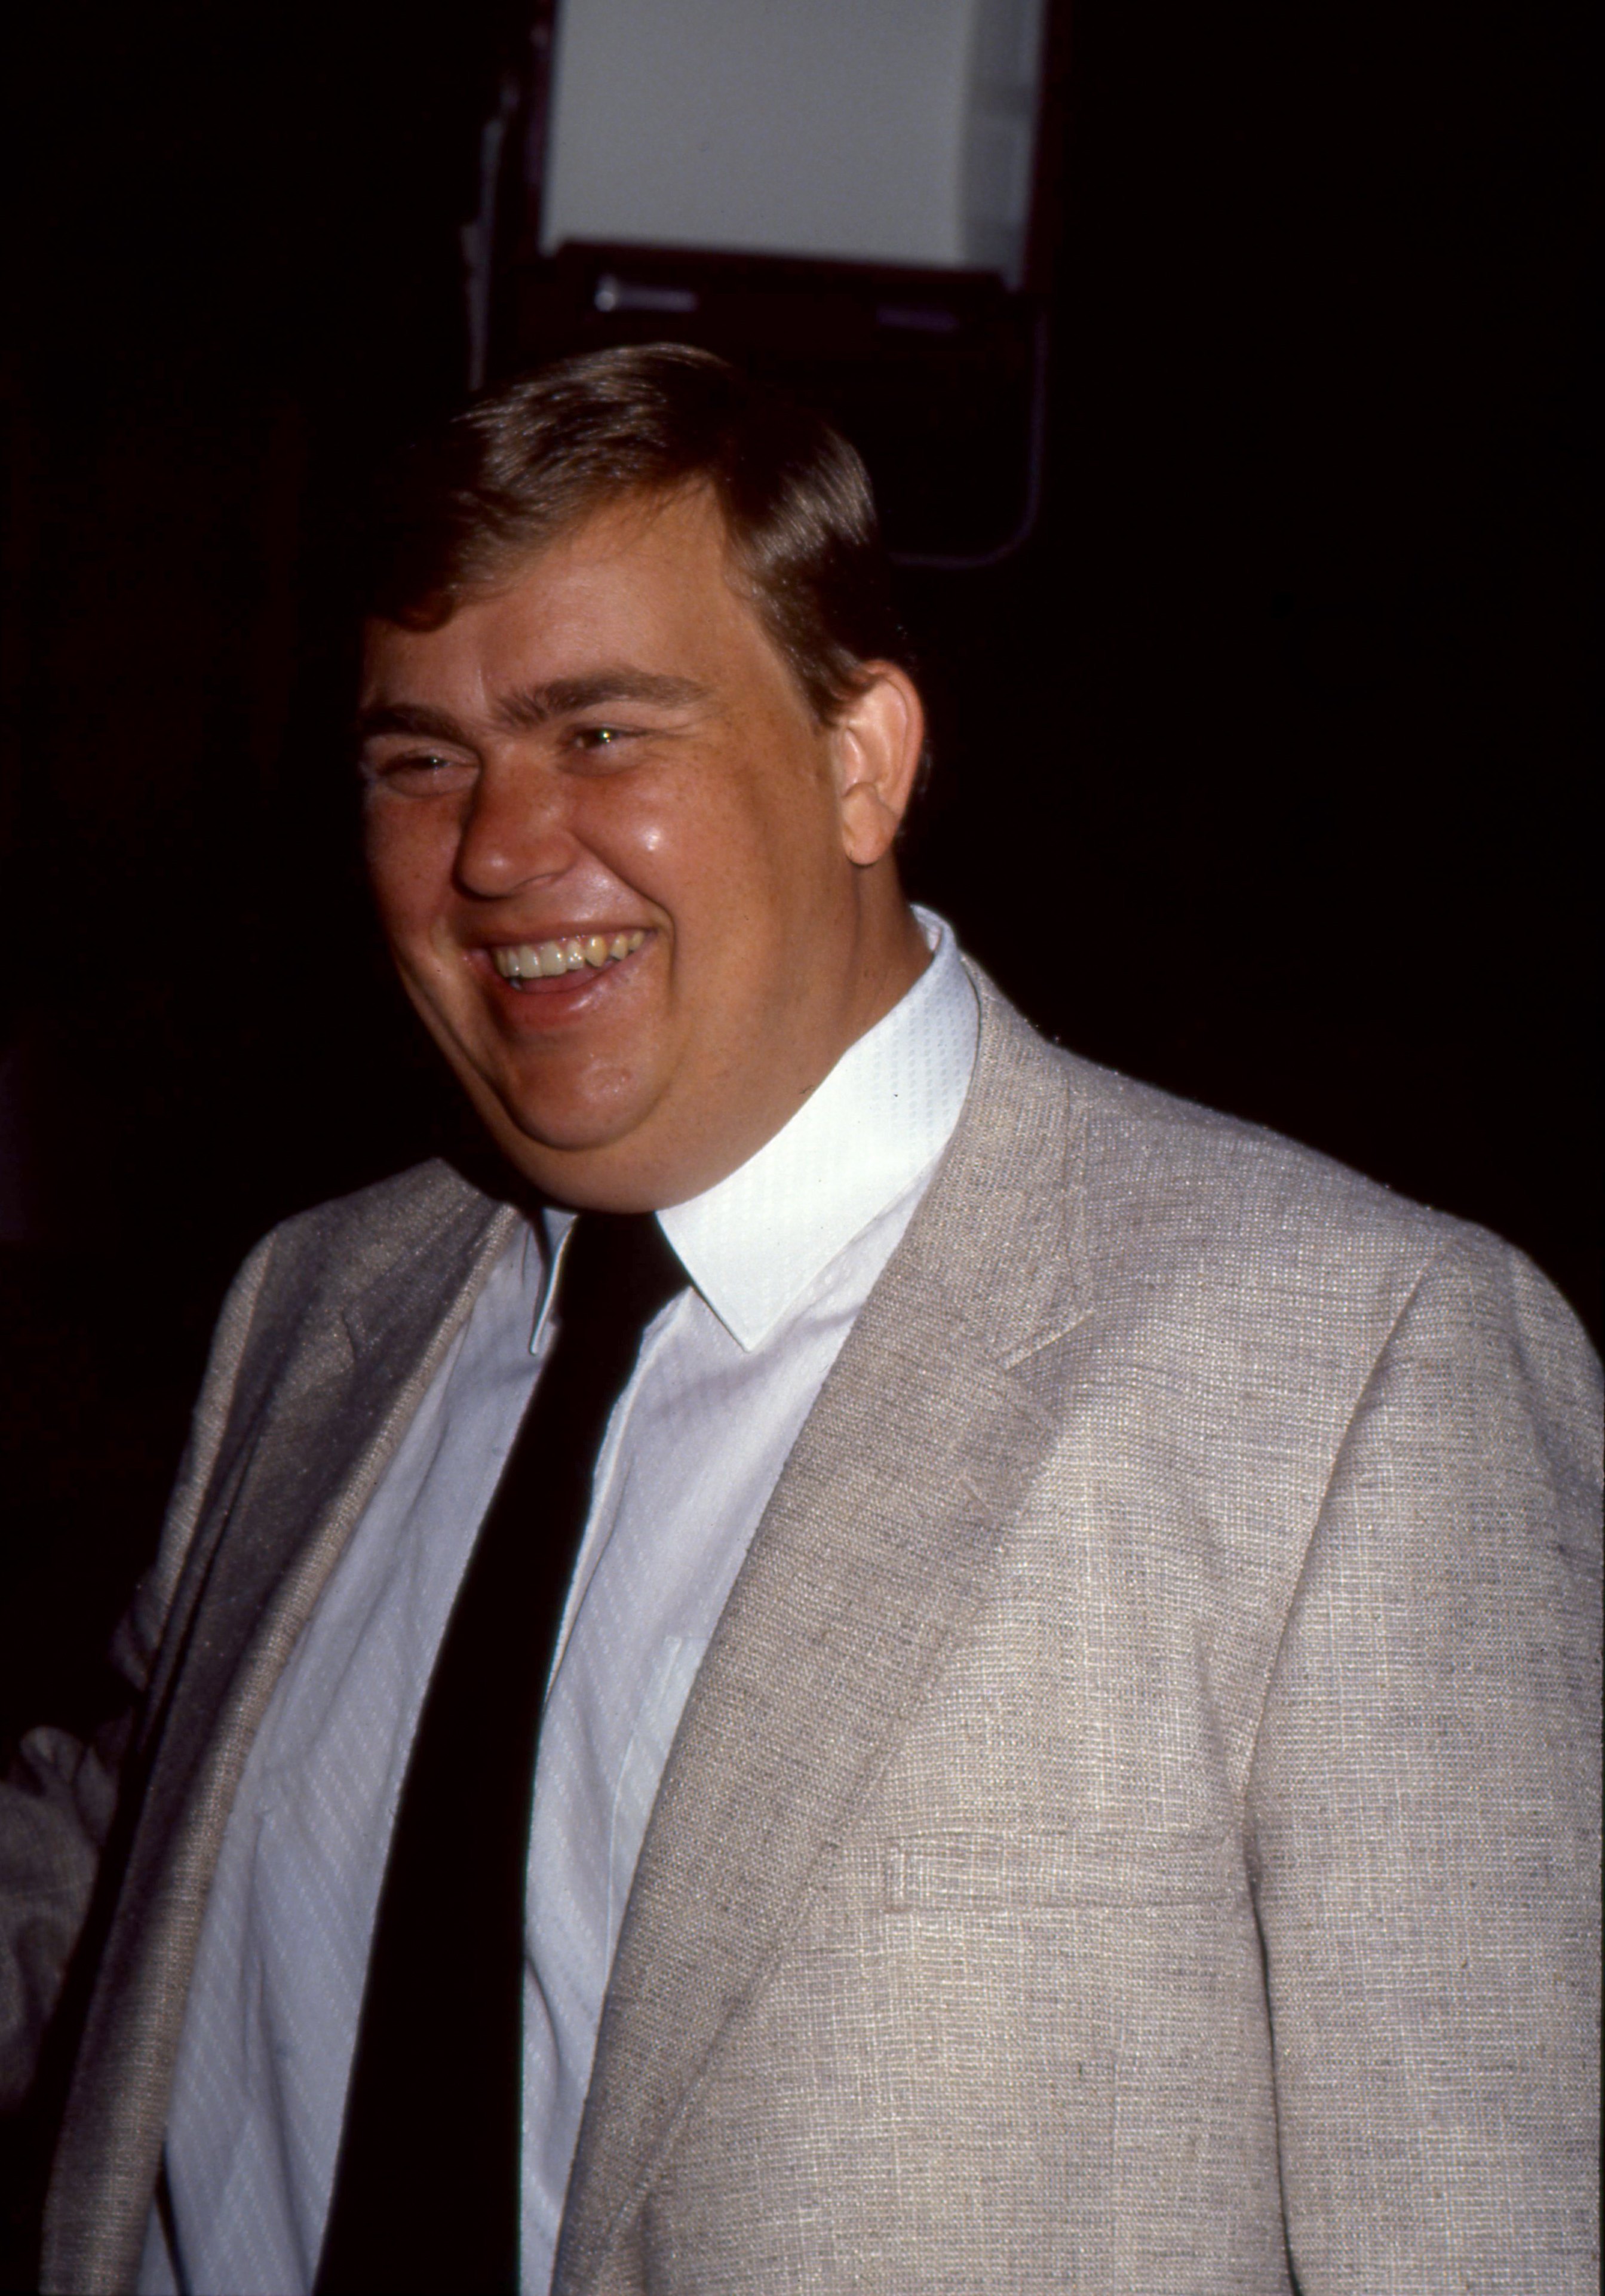 John Candy, circa 1985 | Source: Getty Images